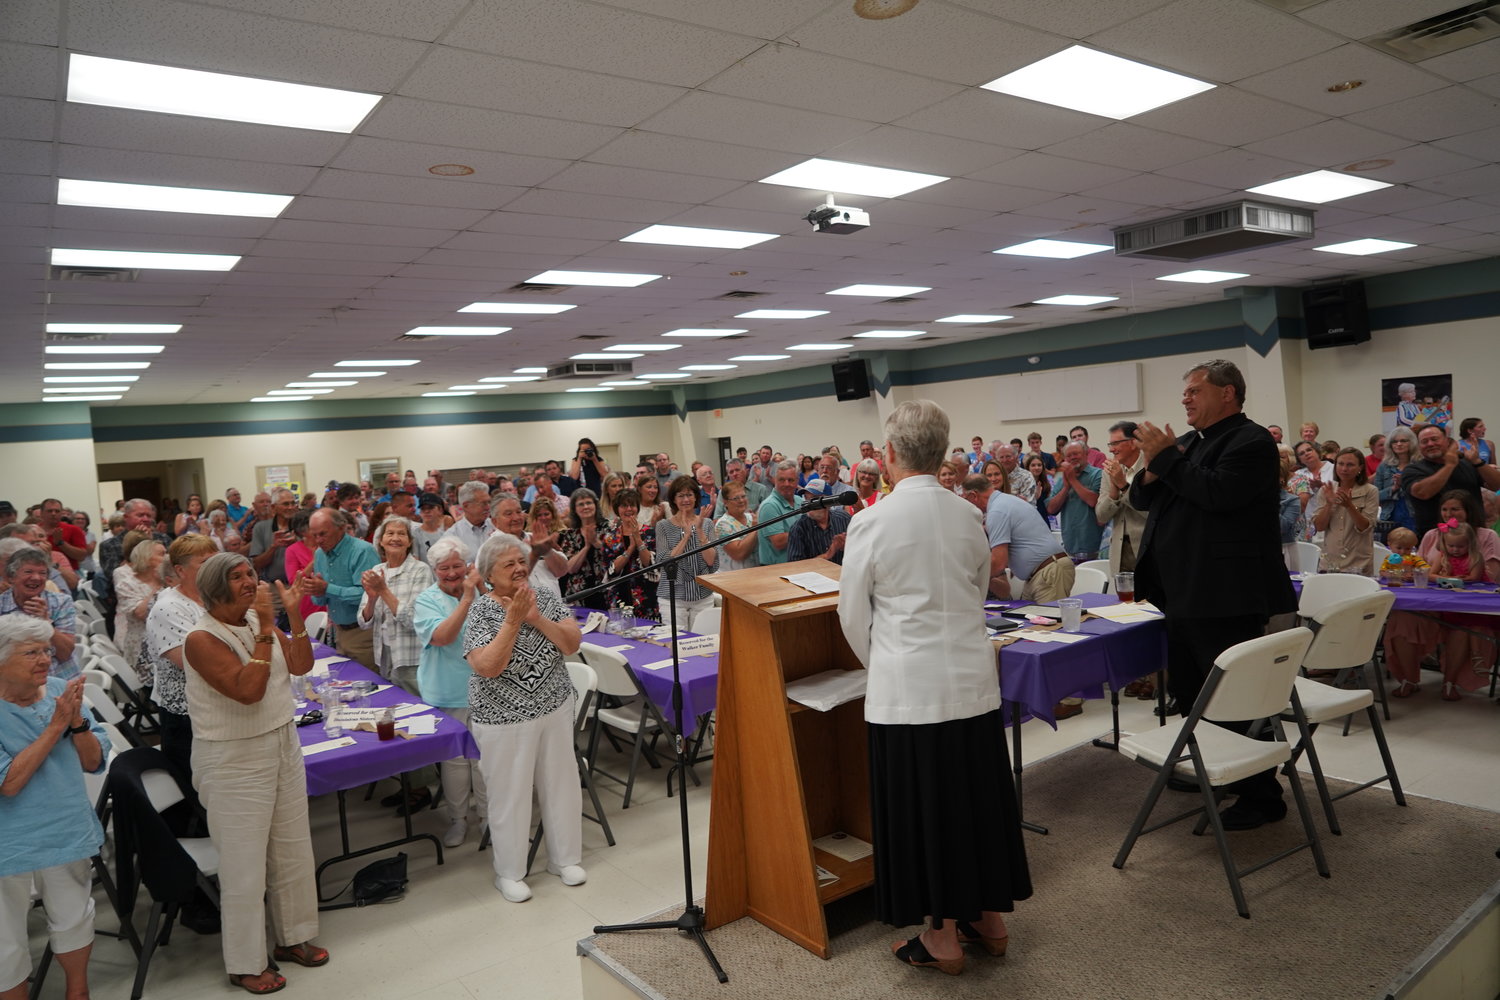 The people at a celebration of Dominican Sr. Suzanne Walker’s 38 years as principal of Holy Rosary School give her a standing ovation.